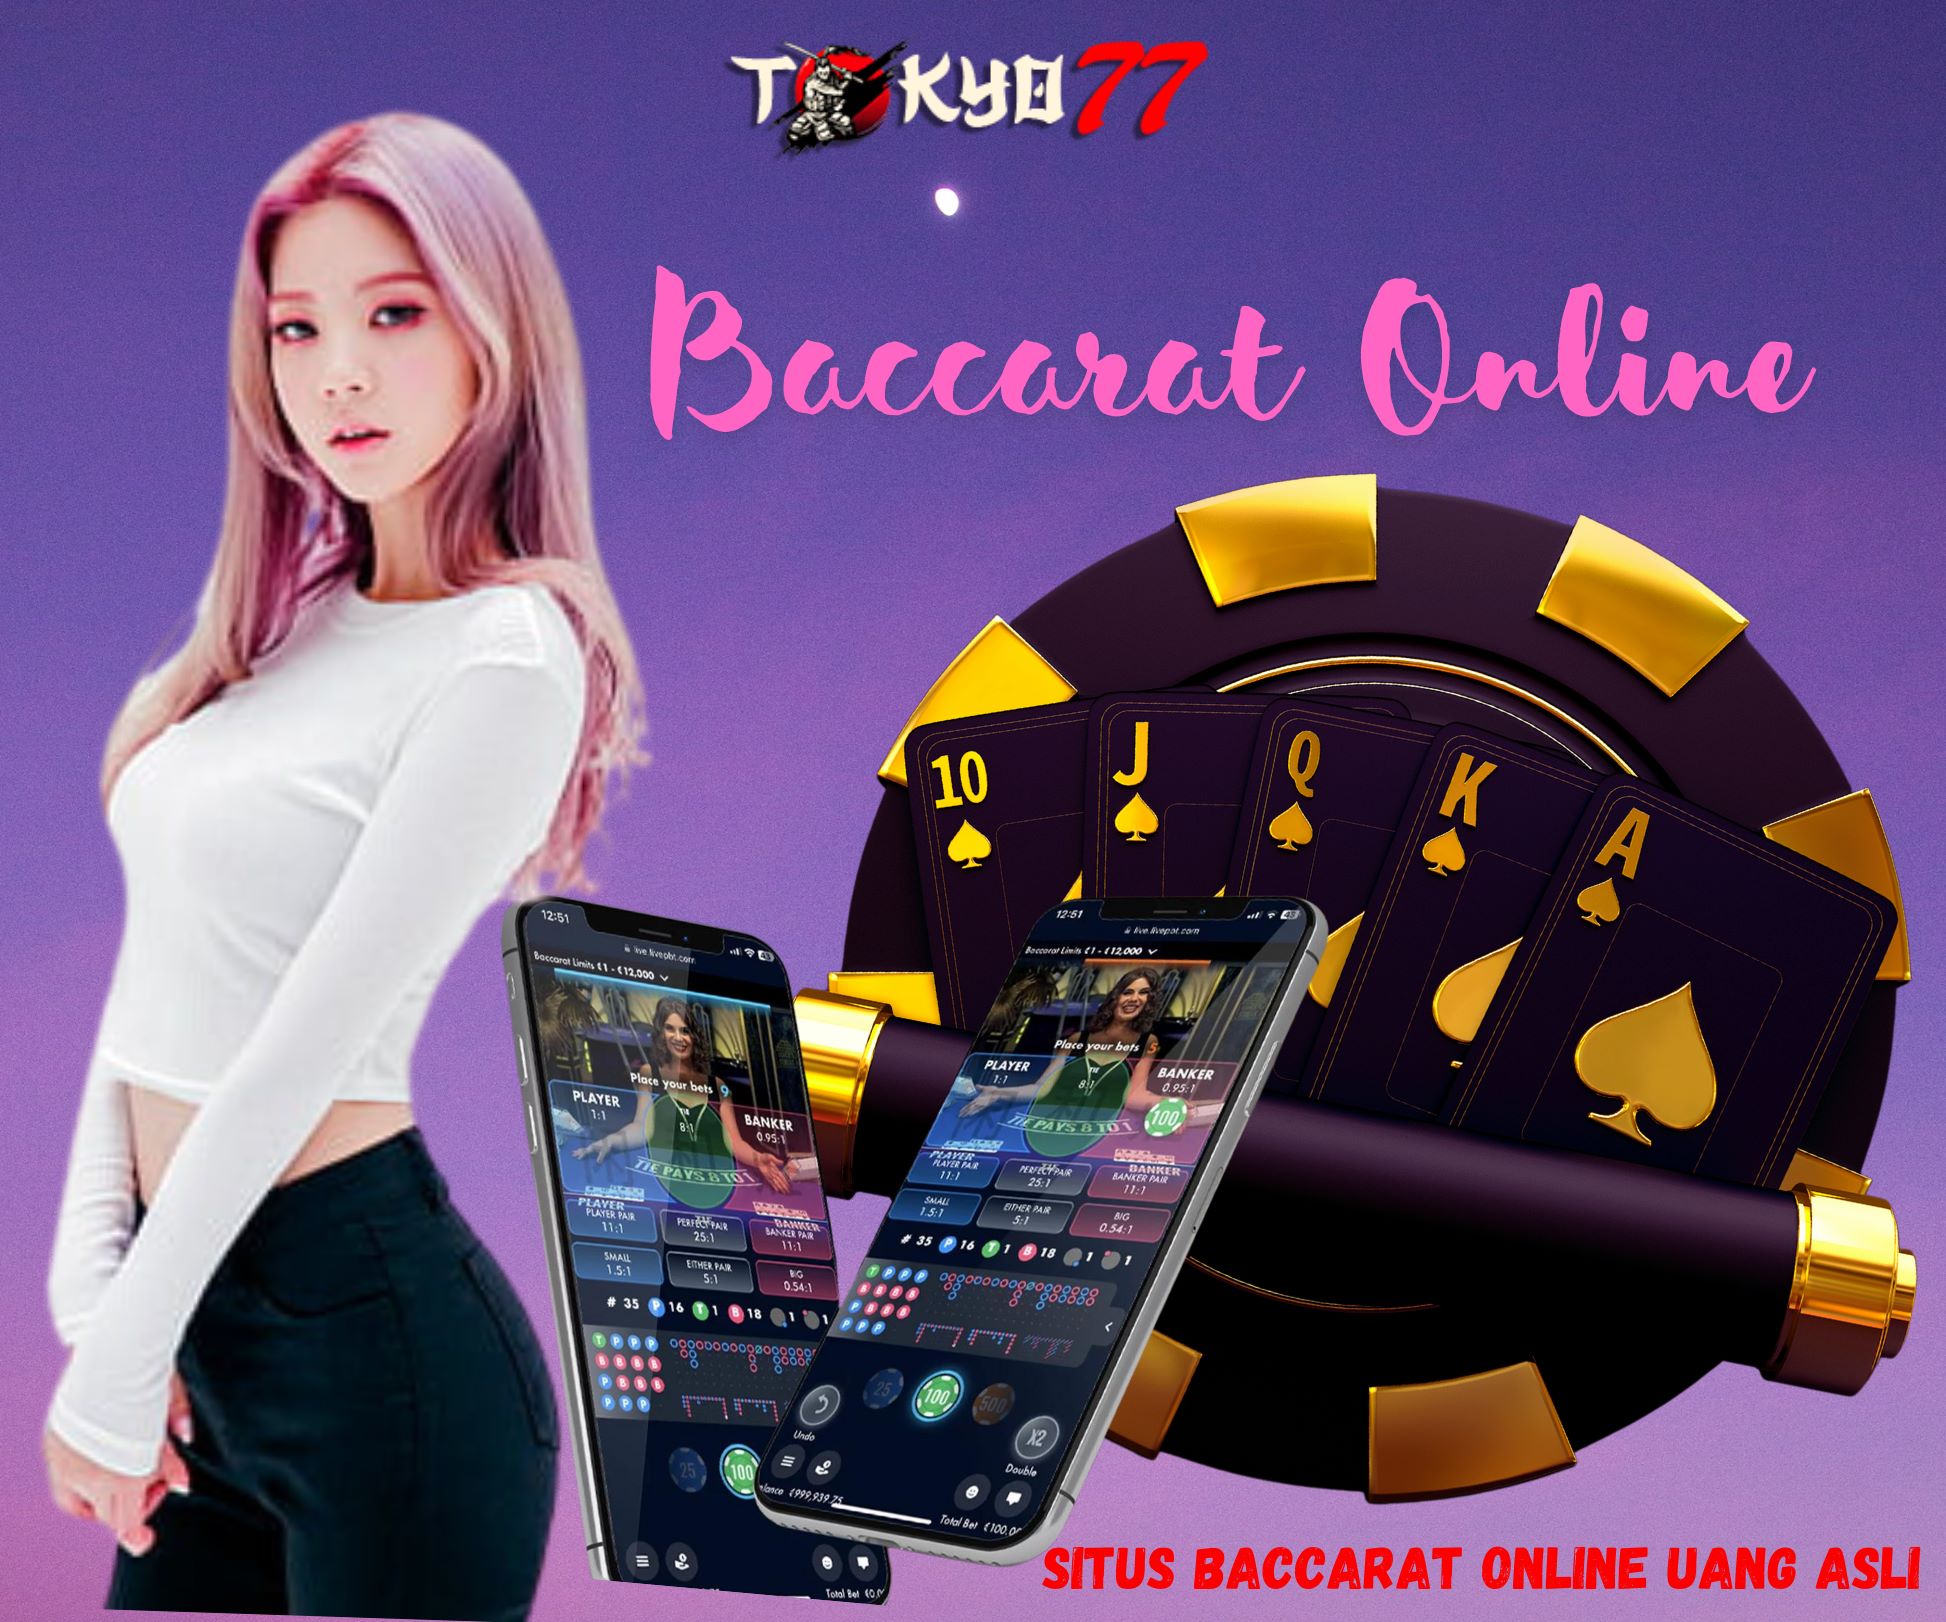 Adding insight into the ins and outs of Baccarat before betting